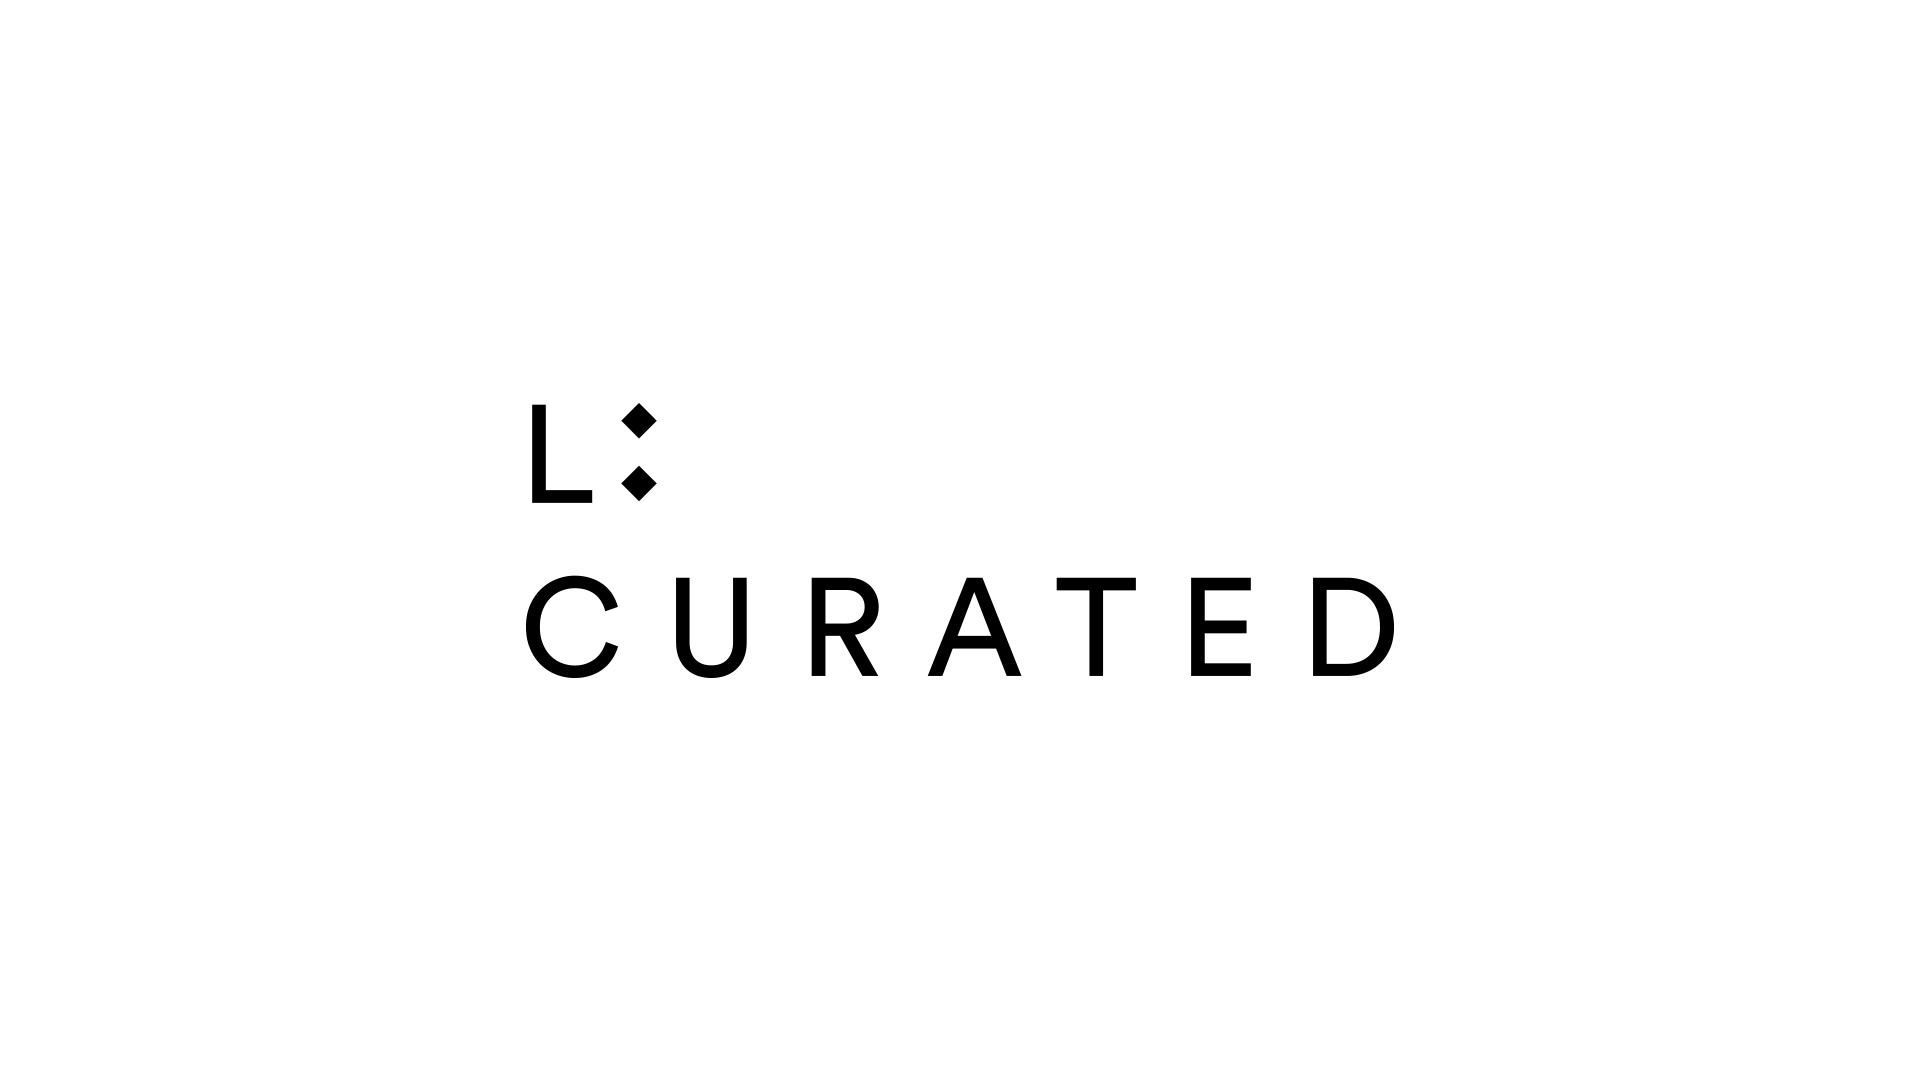 Identity: L:Curated